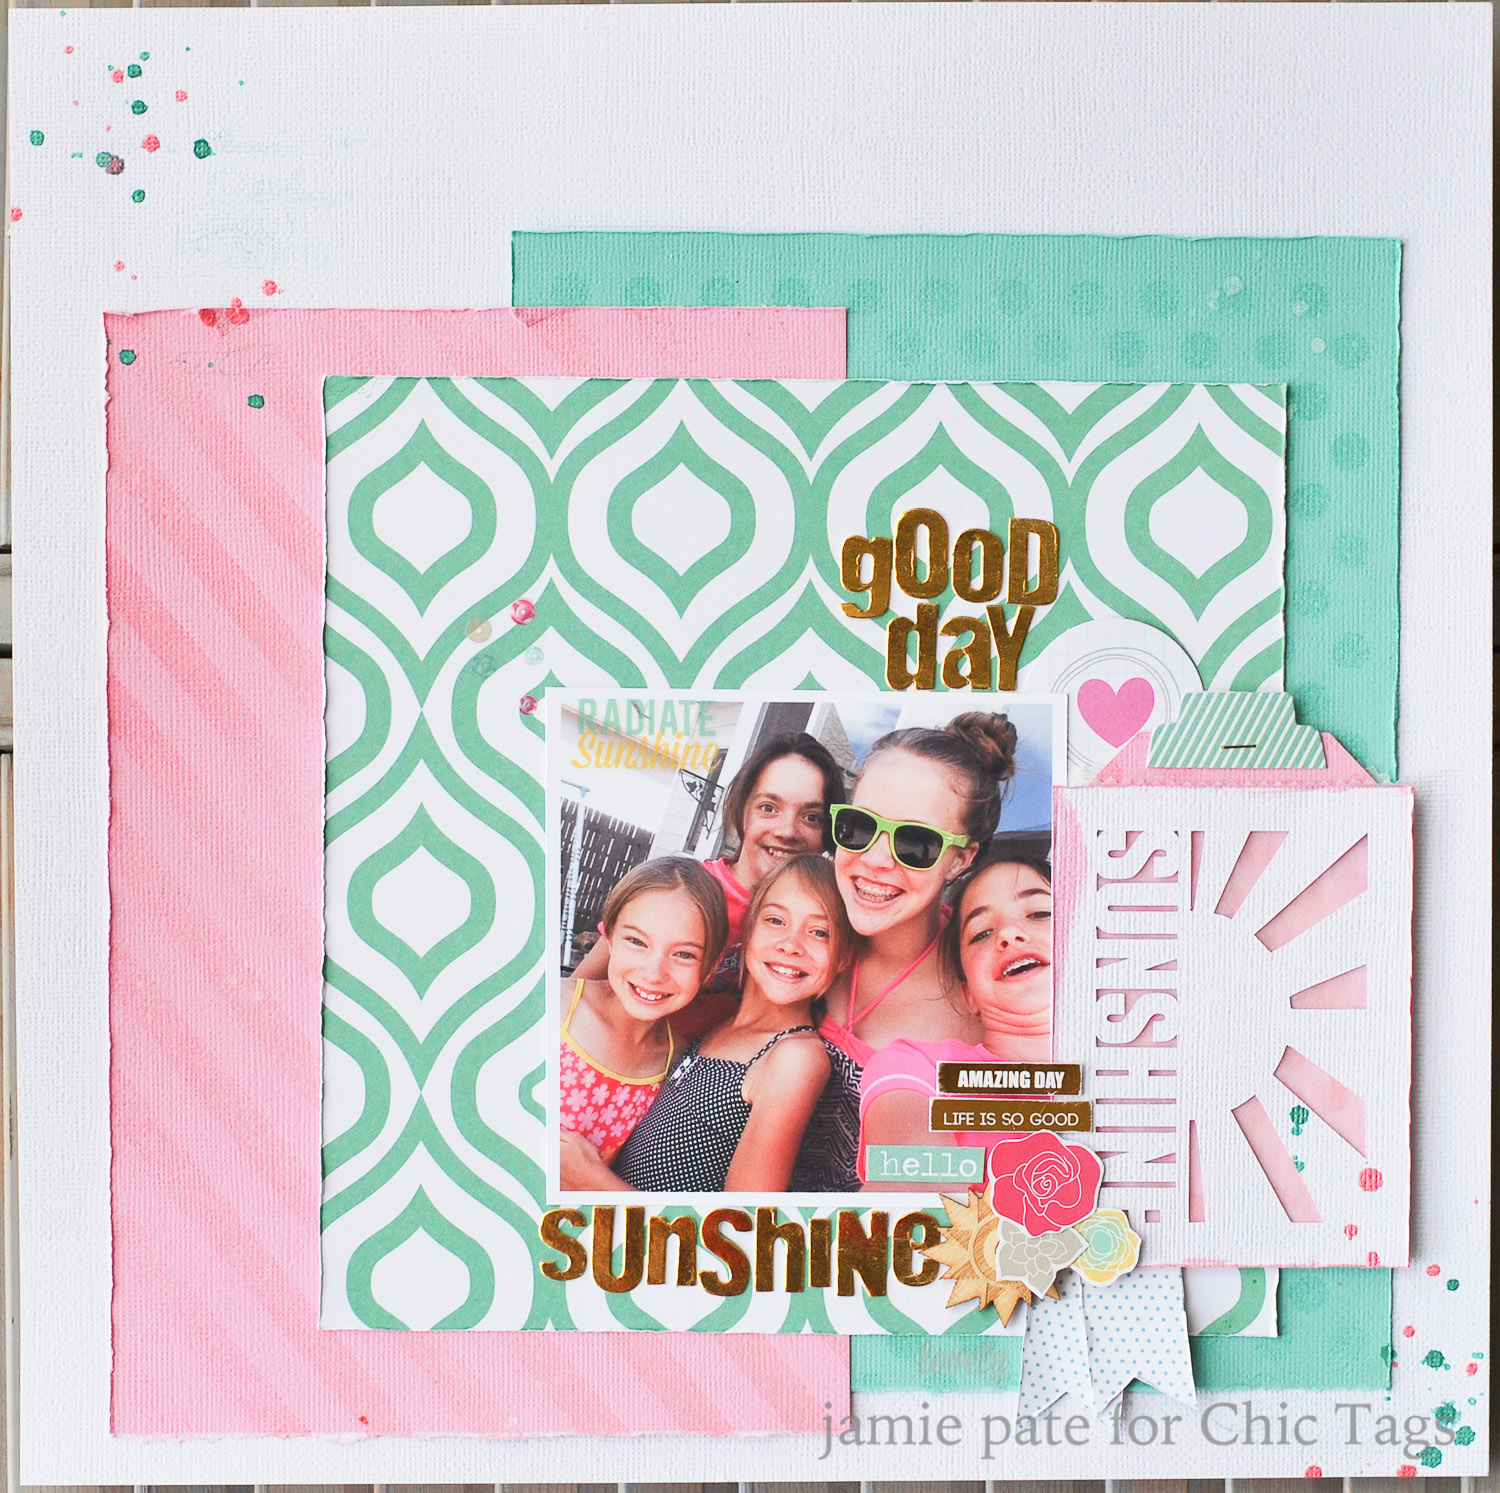 Chic Tags Good Day Sunshine layout by jamie pate